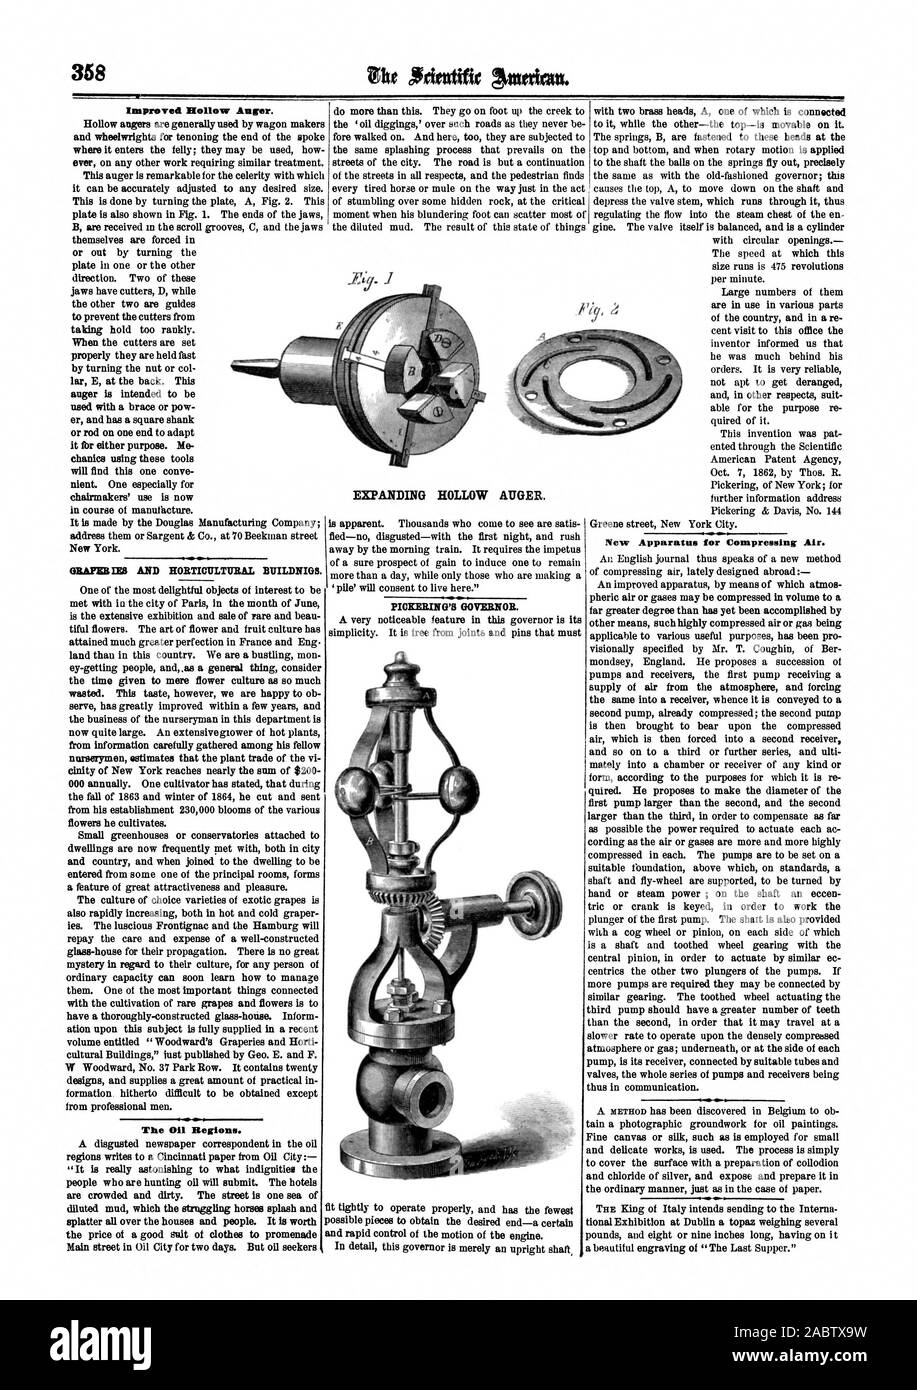 Improved Hollow Auger. The Oil Regions. New Apparatus for Compressing Air. EXPANDING HOLLOW AUGER., scientific american, 1865-06-03 Stock Photo